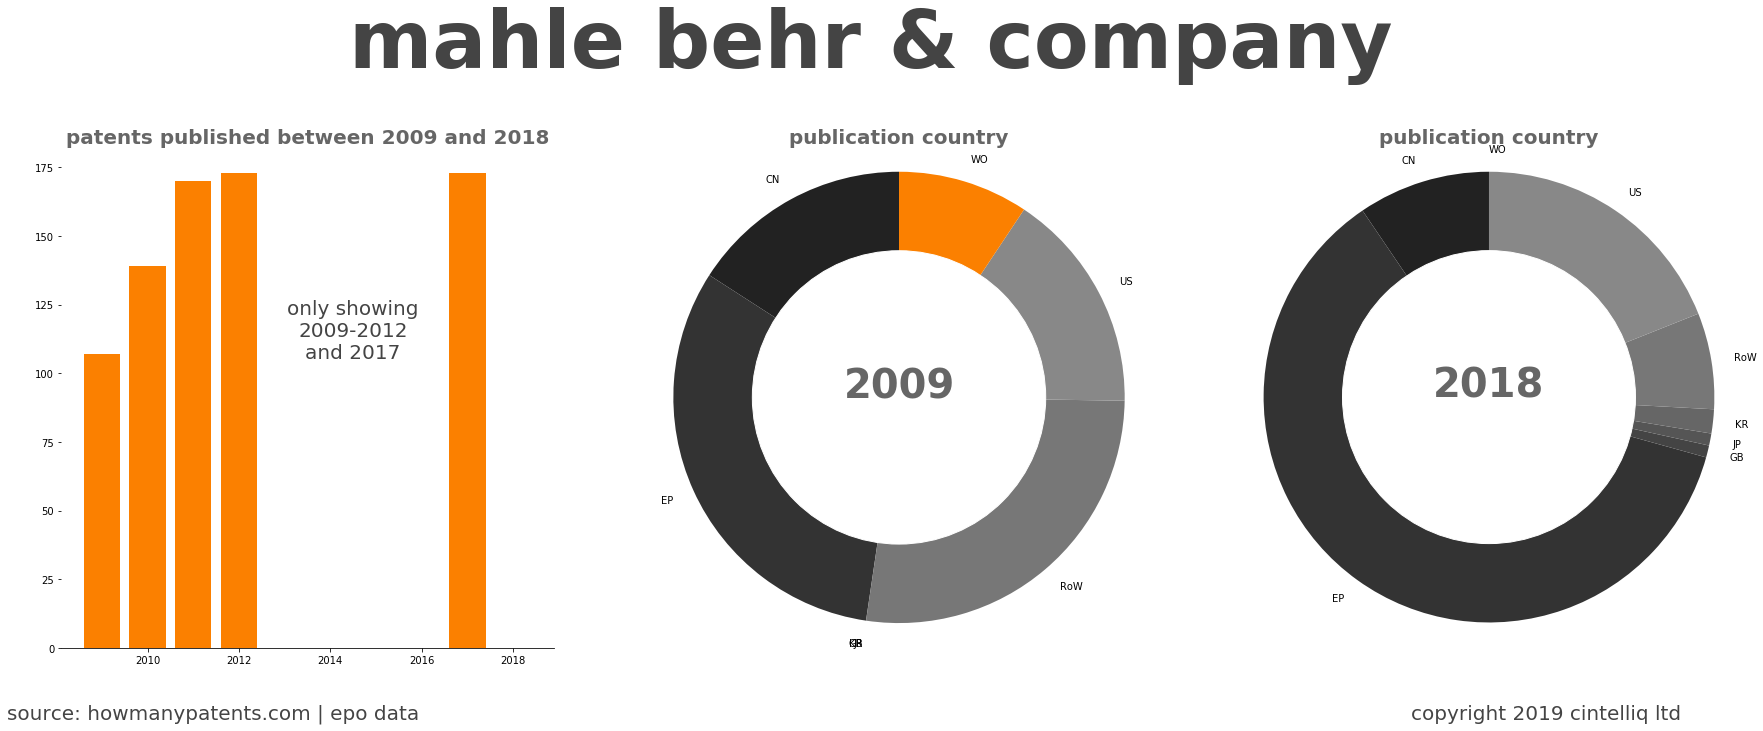 summary of patents for Mahle Behr & Company